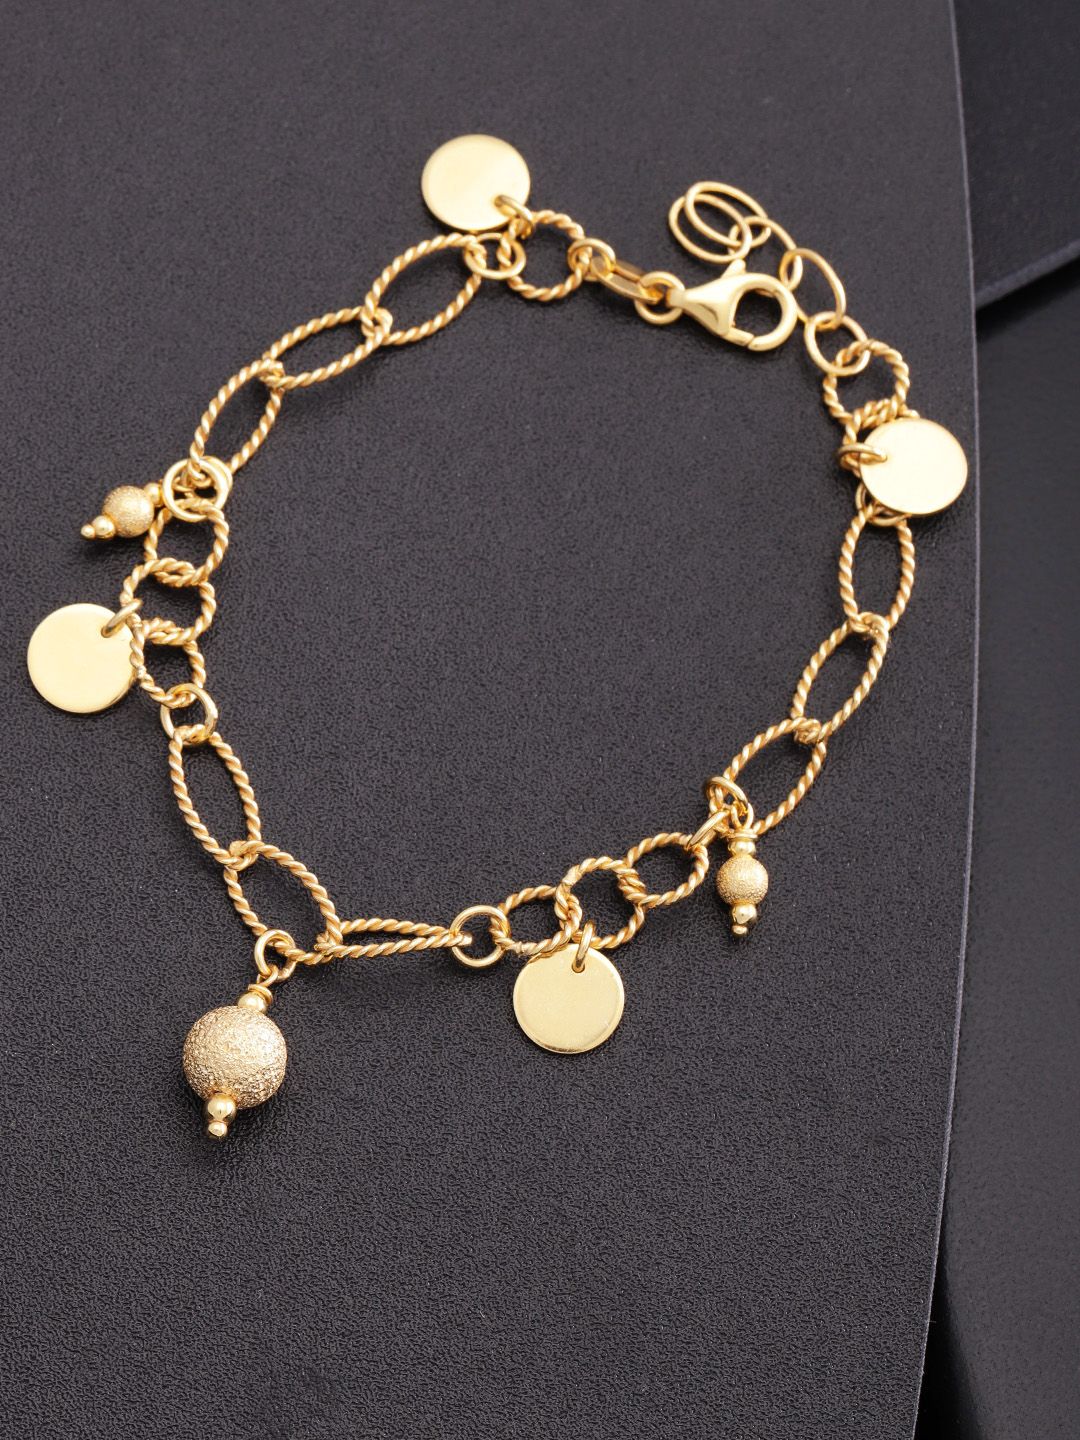 Carlton London Gold-Plated Charm Bracelet Price in India